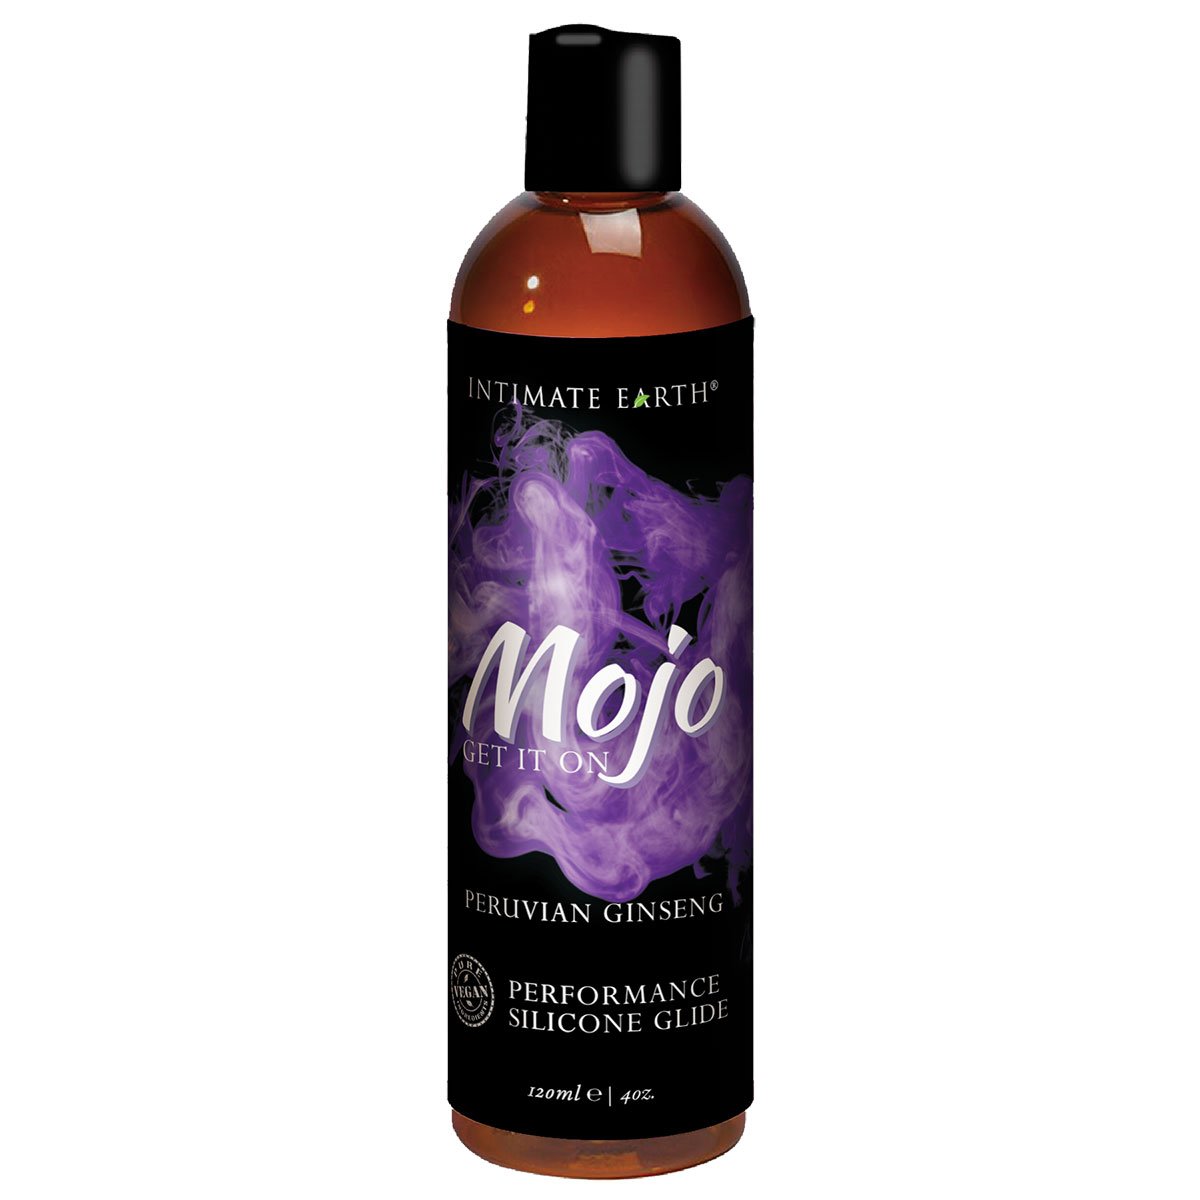 Intimate Earth MOJO Peruvian Ginseng Silicone Performance Glide 4oz-120ml - Buy At Luxury Toy X - Free 3-Day Shipping